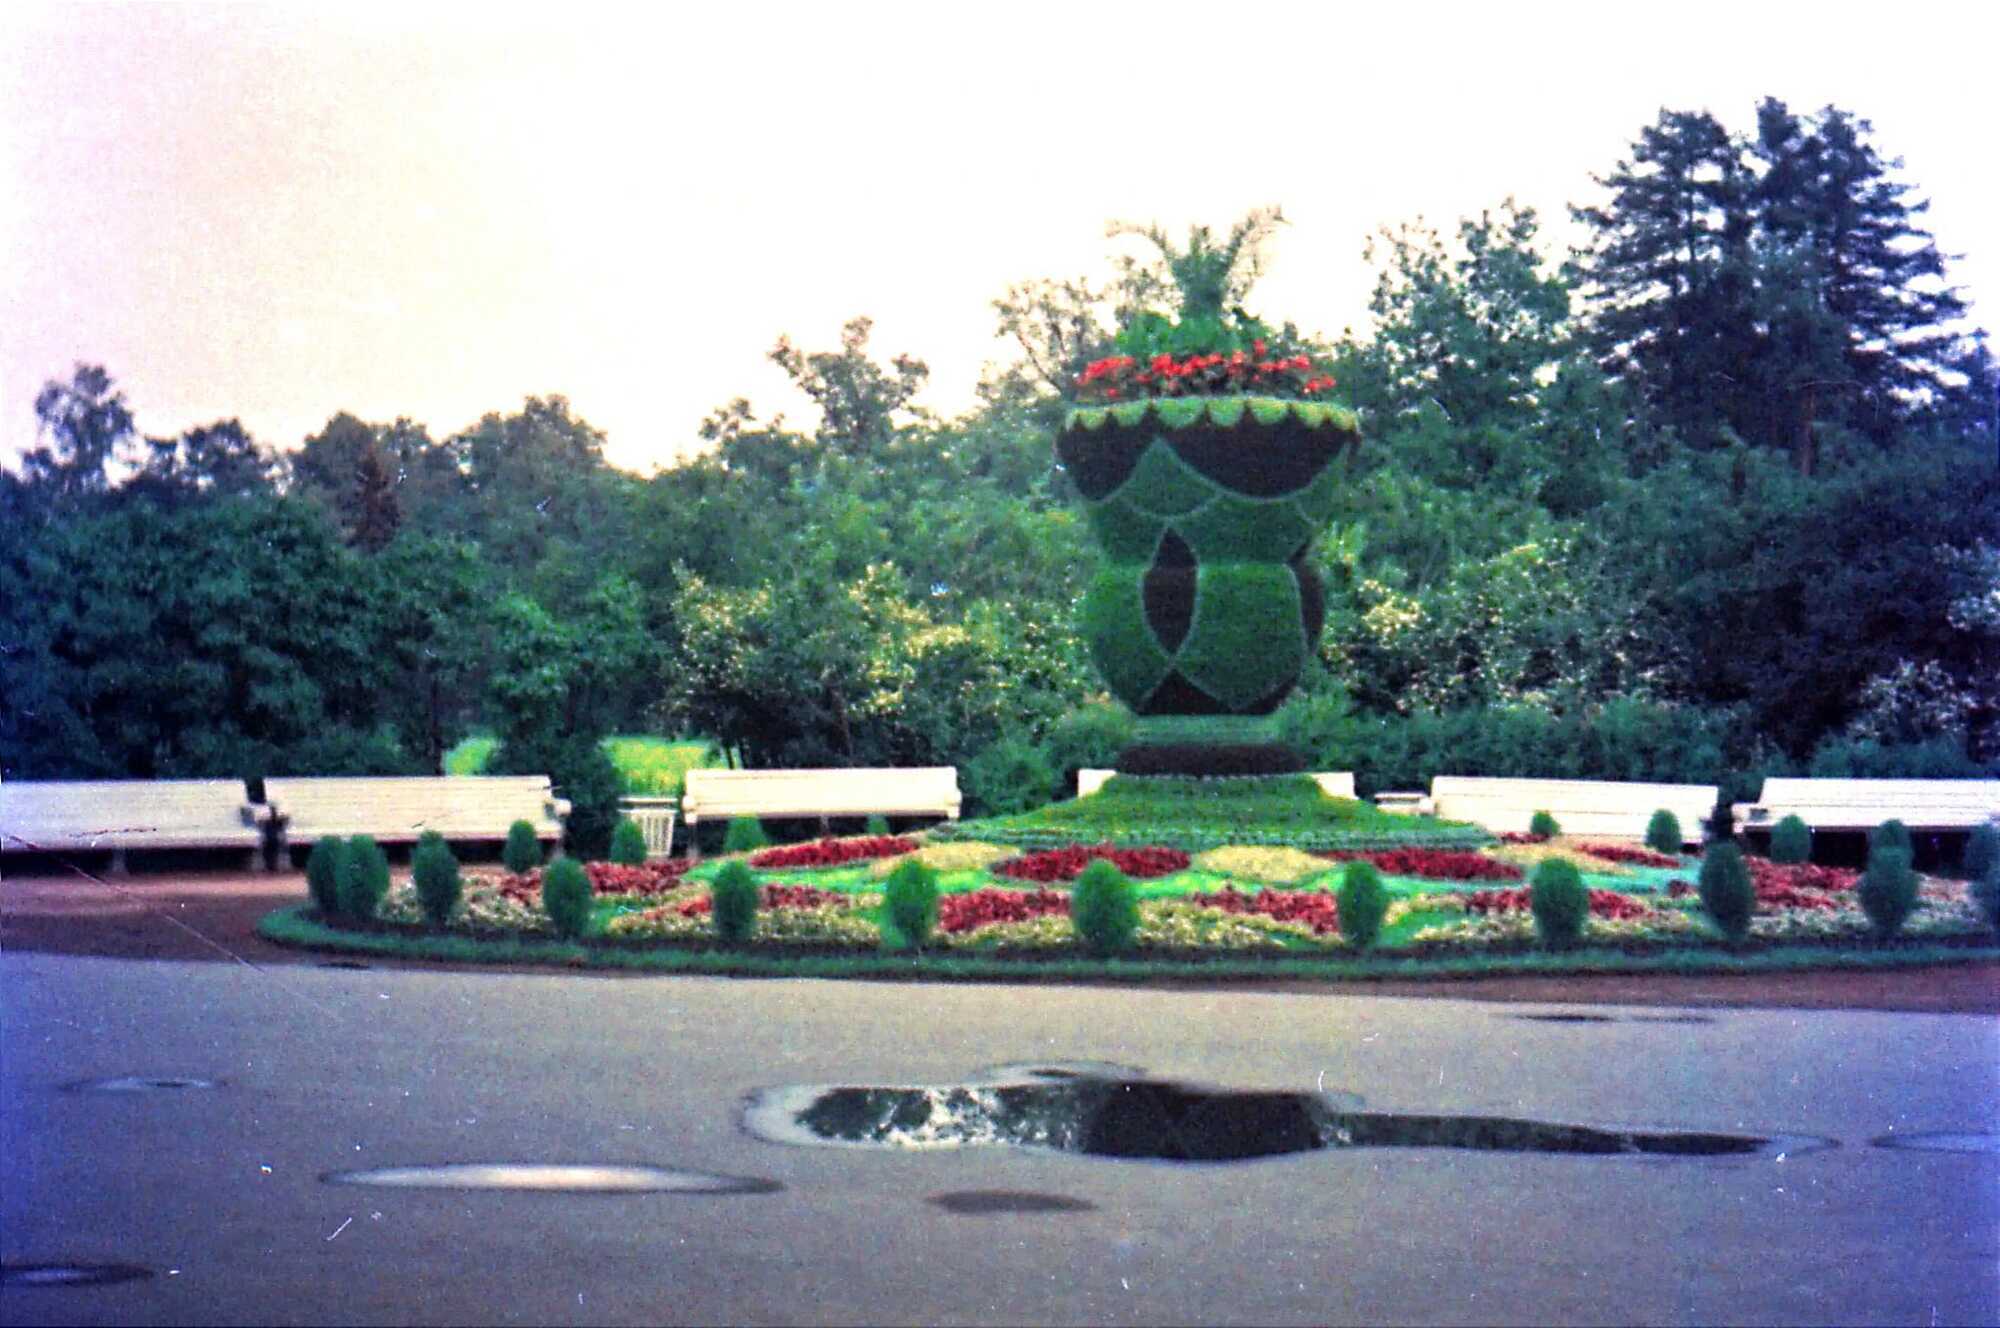 Lots of trees and flowers: the web shows how Kyiv was landscaped in 1956. Archival photos